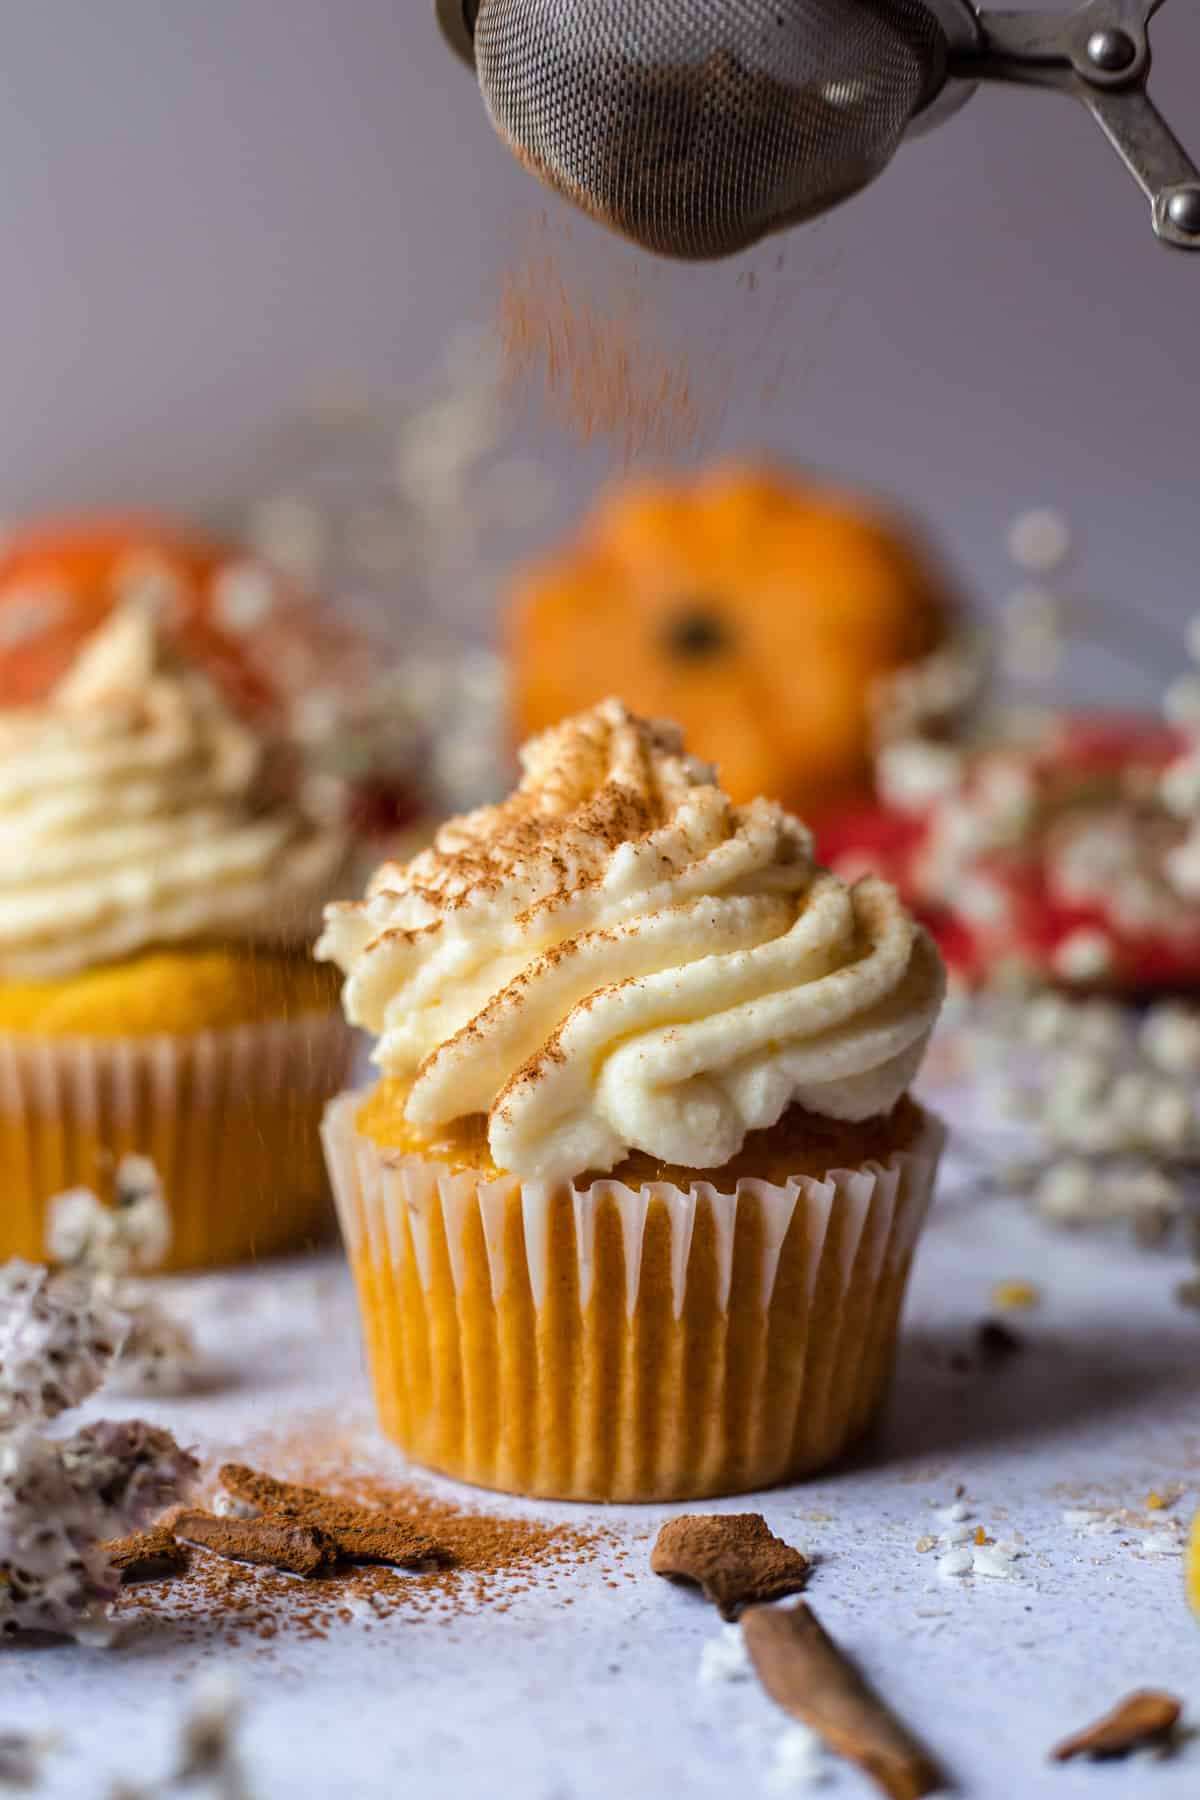 Cupcake being sprinkled with ground cinnamon on decorated white surface. 